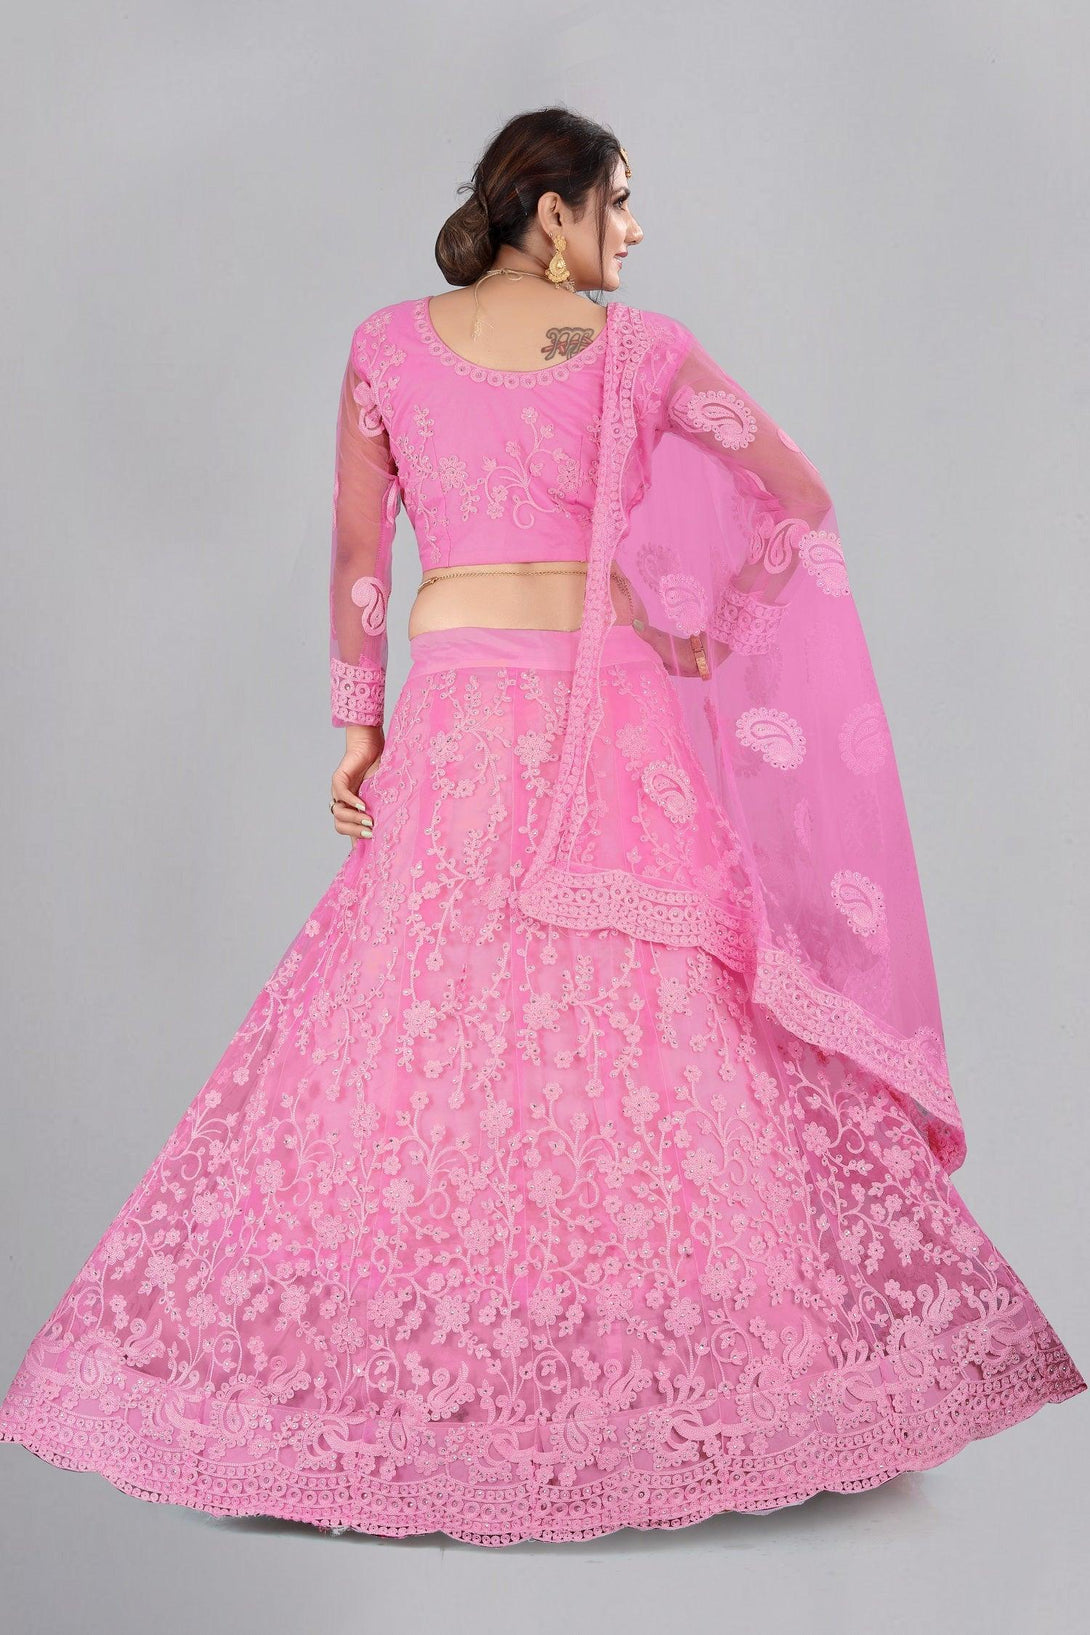 Baby Pink Net Lehenga Choli with Floral Embroidery - Indiakreations